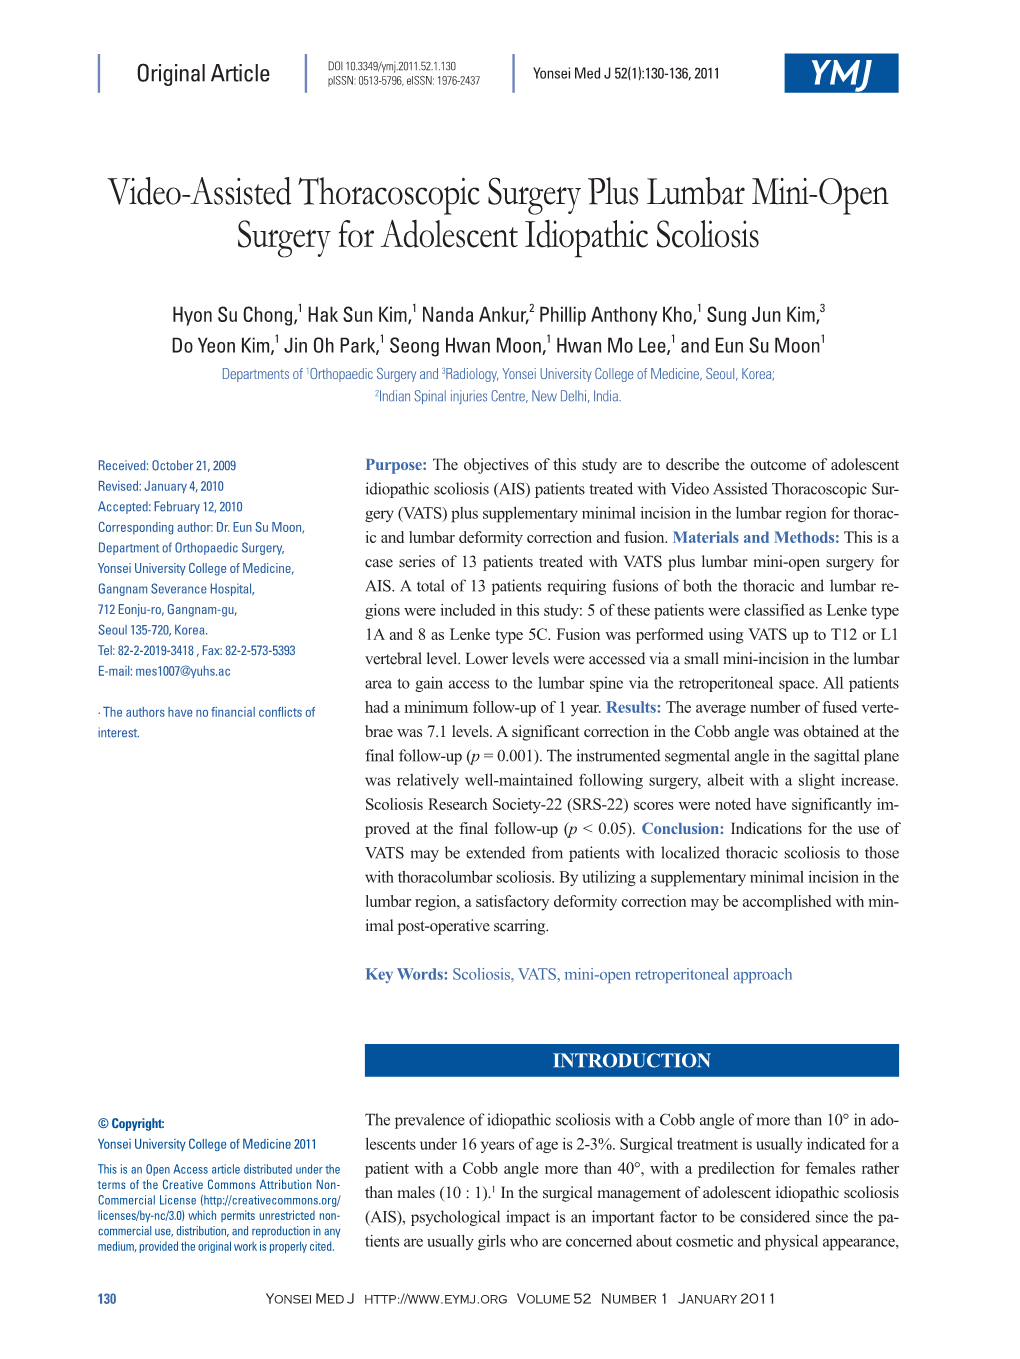 Video-Assisted Thoracoscopic Surgery Plus Lumbar Mini-Open Surgery for Adolescent Idiopathic Scoliosis